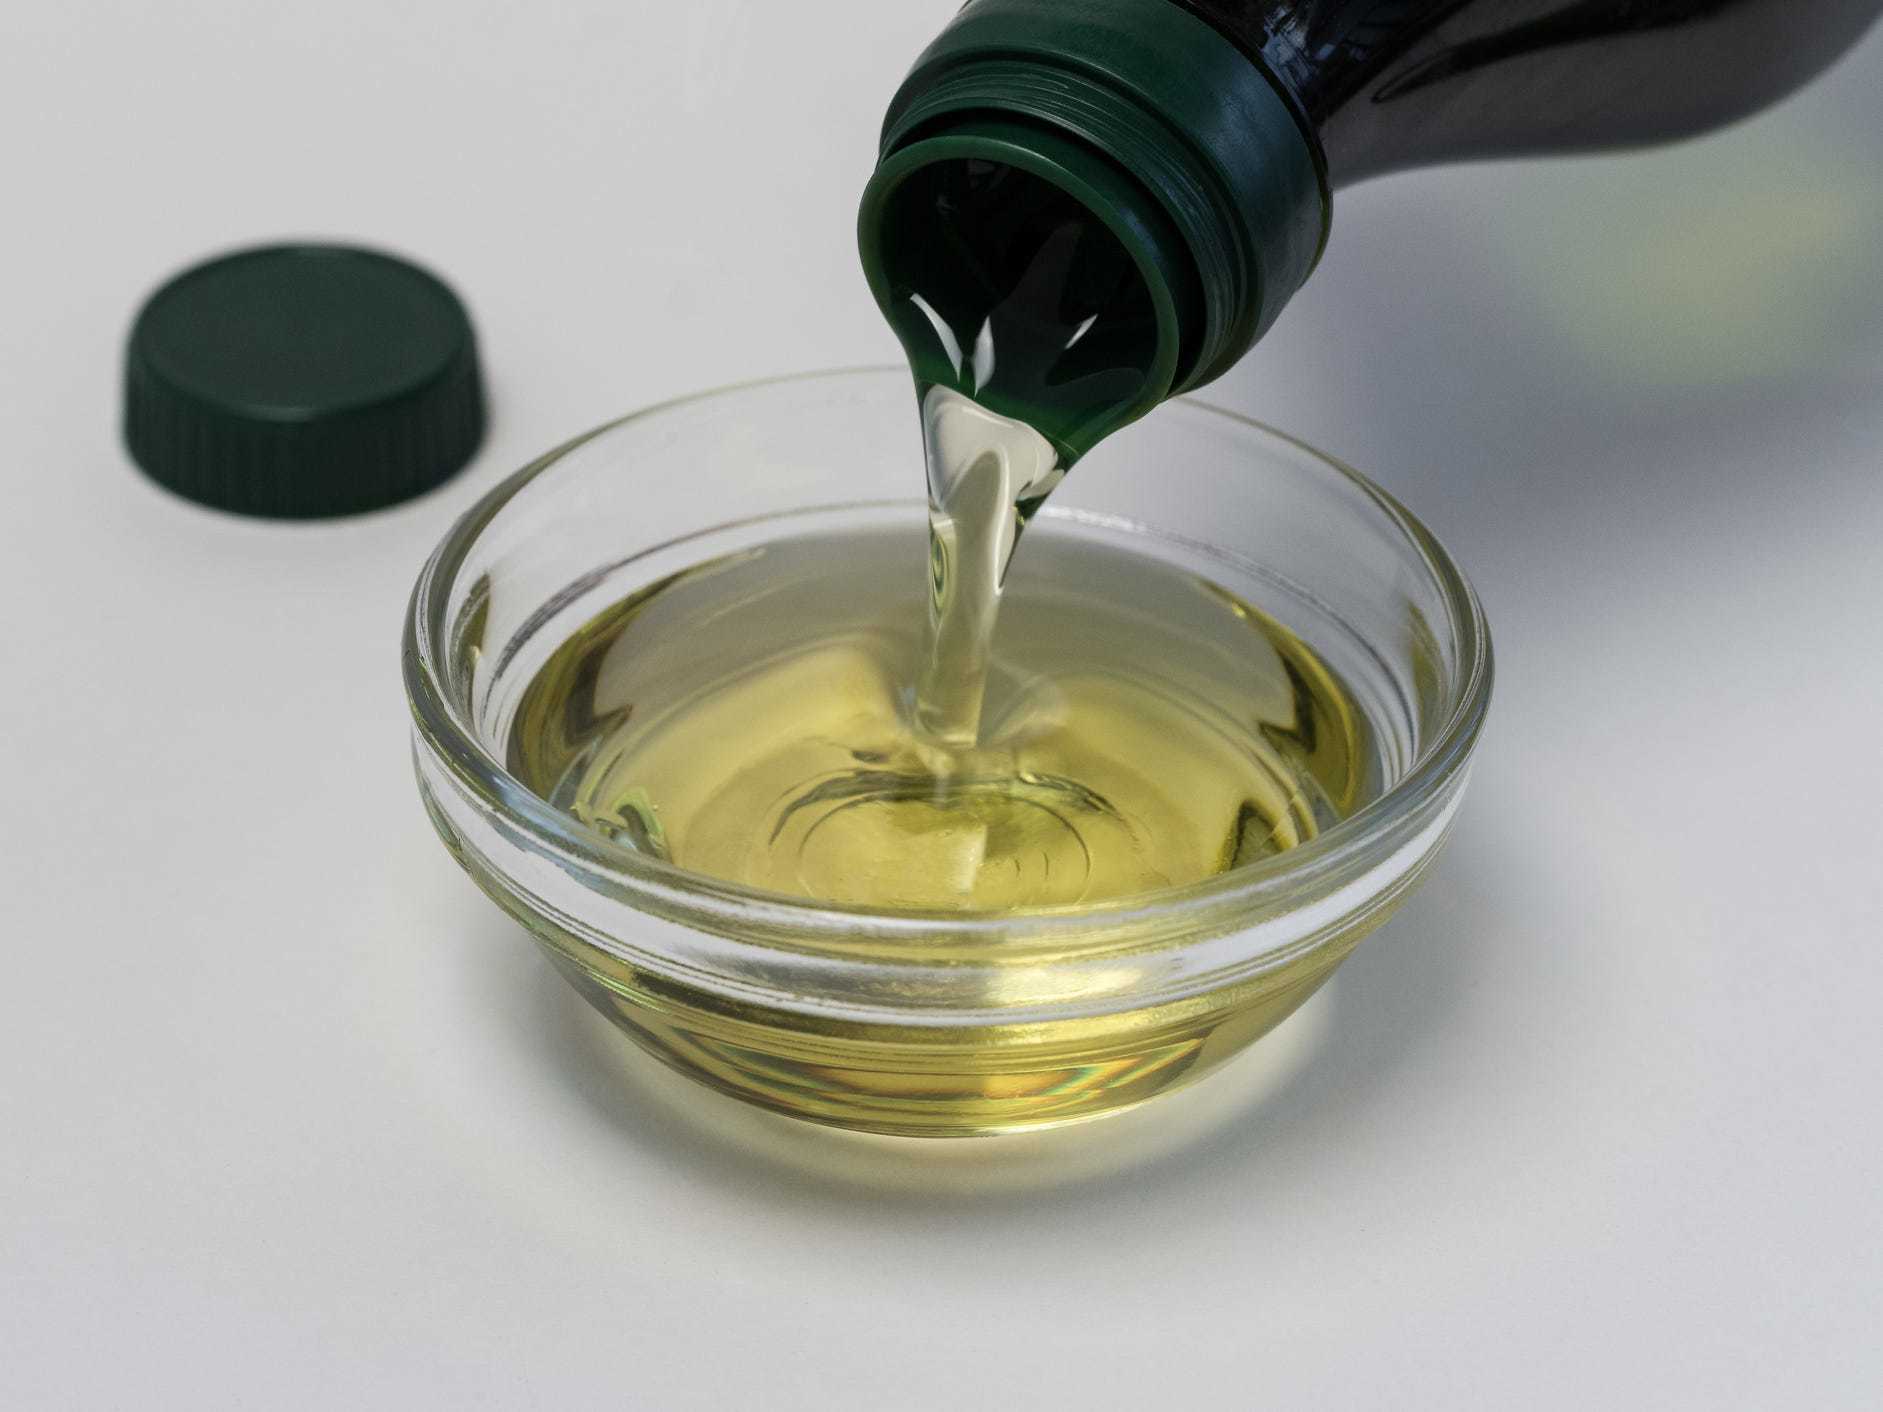 Grapeseed oil is poured into a small glass bowl atop of a white background.